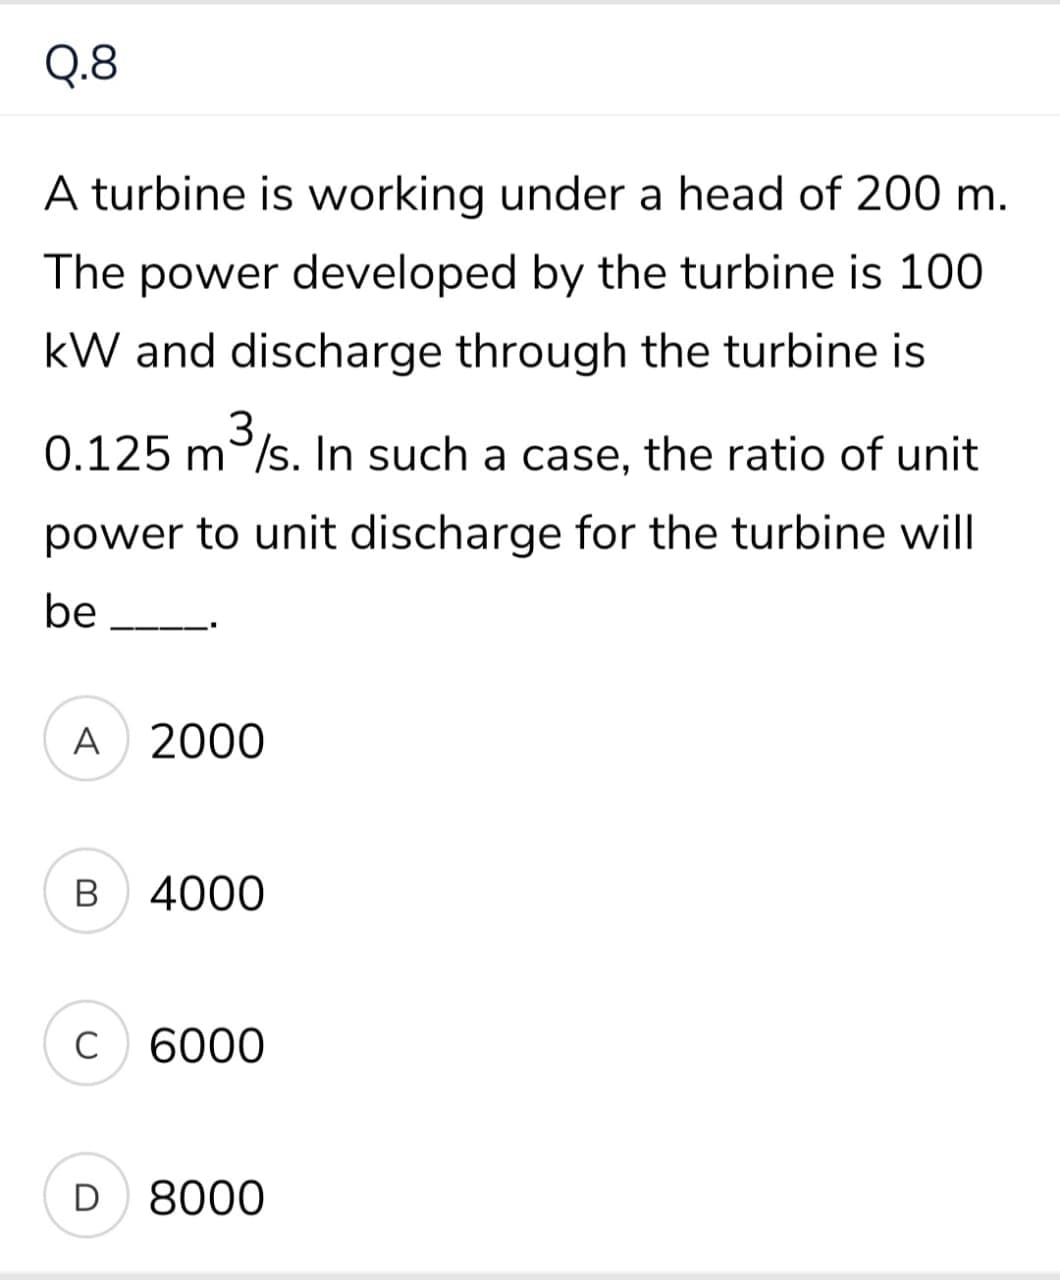 Q.8
A turbine is working under a head of 200 m.
The power developed by the turbine is 100
kW and discharge through the turbine is
0.125 m/s. In such a case, the ratio of unit
power to unit discharge for the turbine will
be
A 2000
в 4000
C 6000
D 8000
